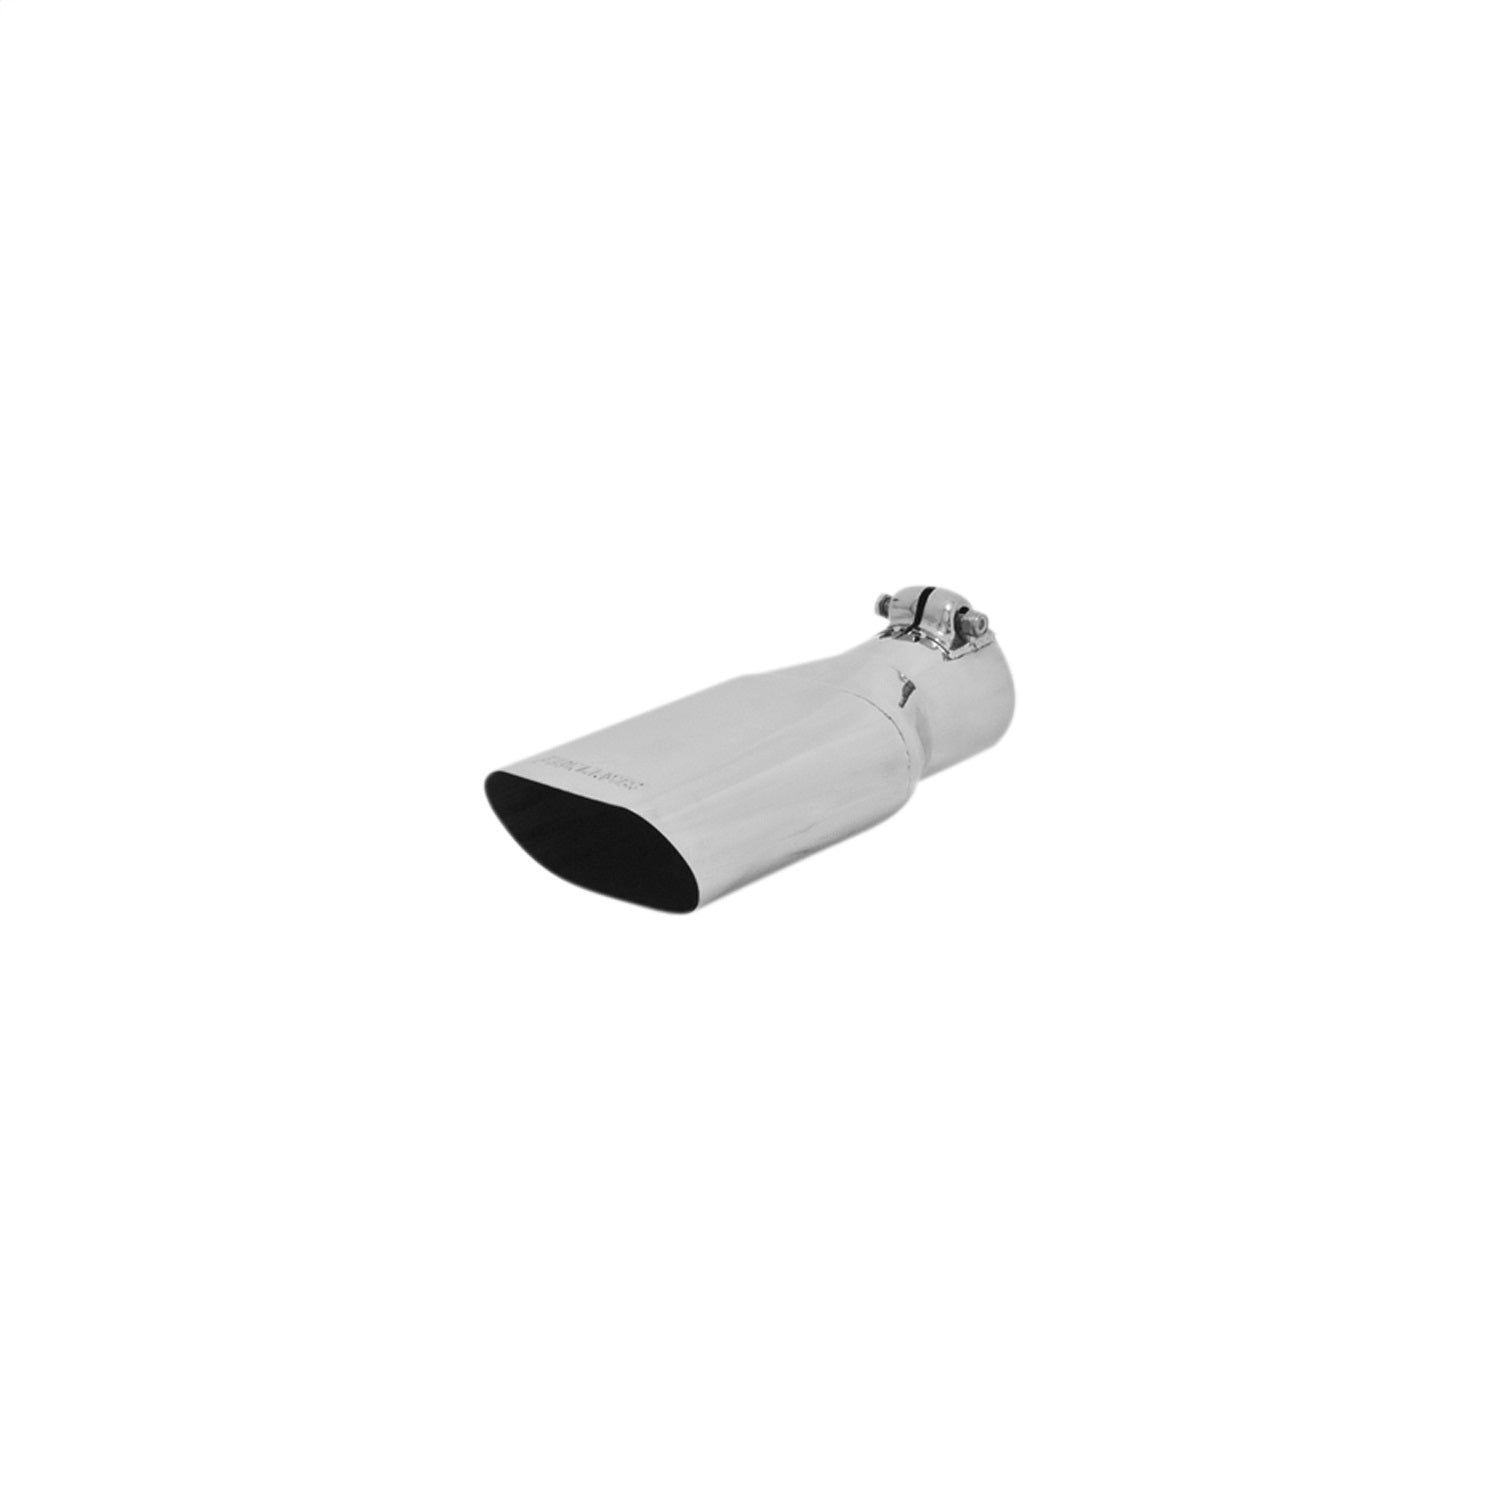 Flowmaster 15385 Stainless Steel Exhaust Tip Fits 68-72 Chevelle